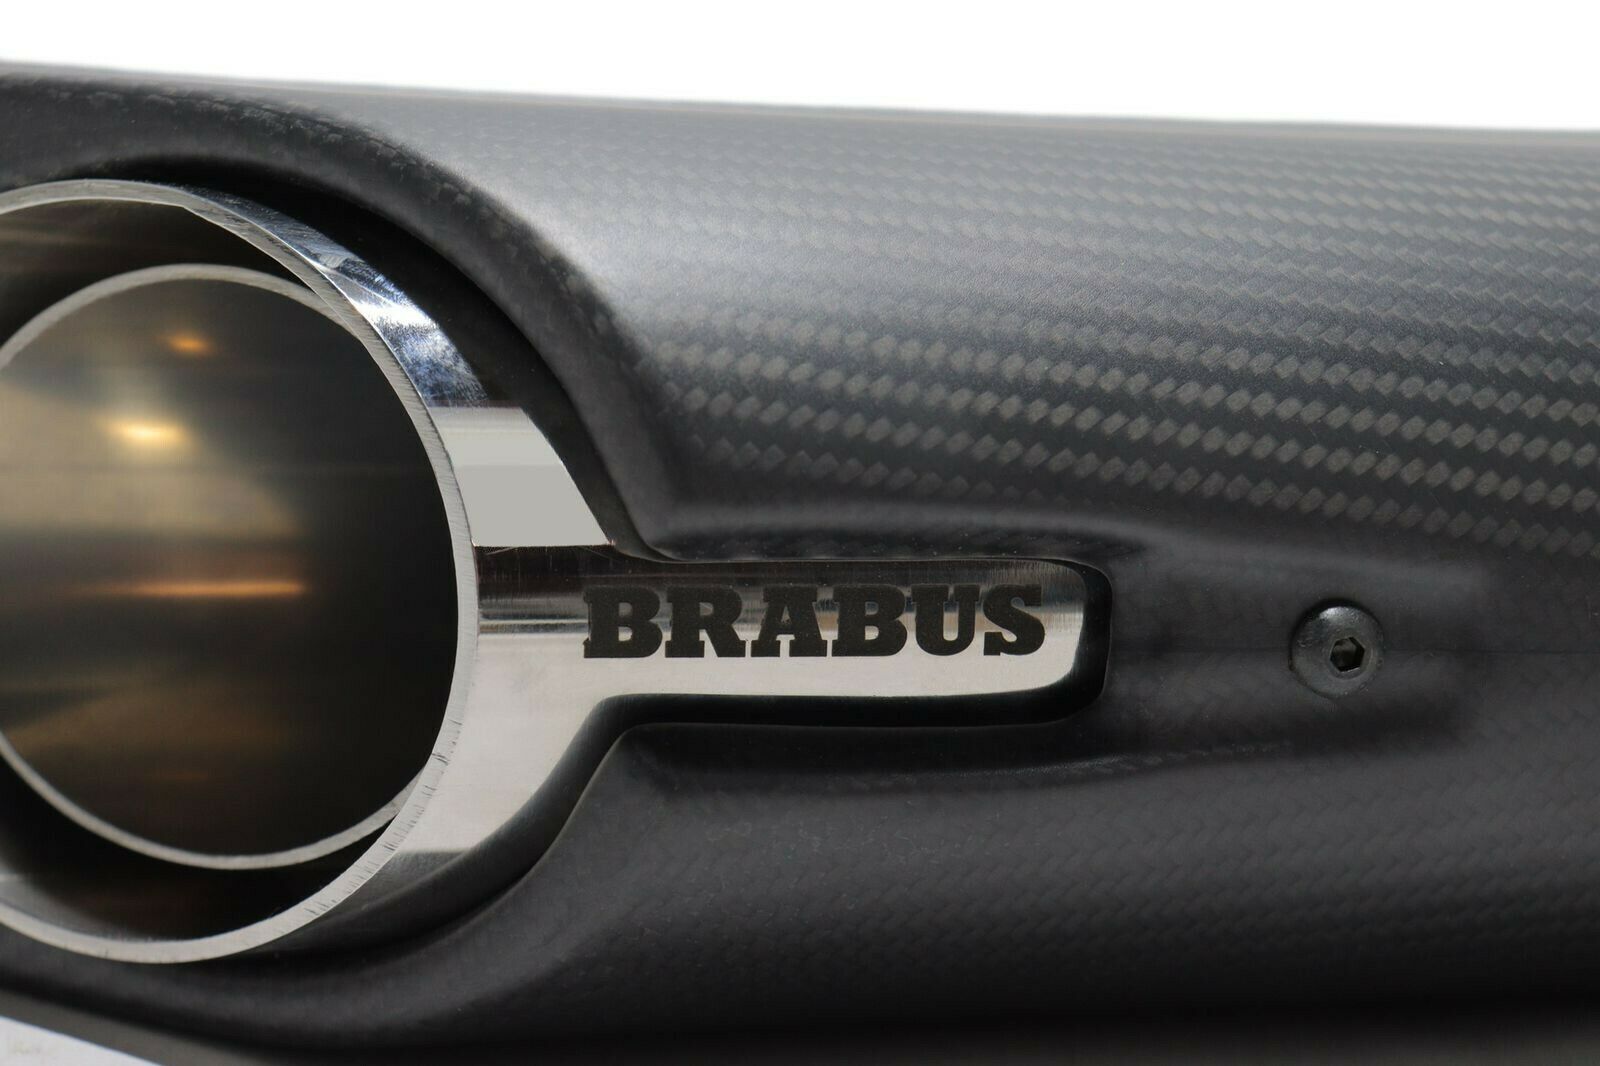 Brabus style exhaust pipes mufflers Rocket Edition for Mercedes-Benz W463A W464 G-Class